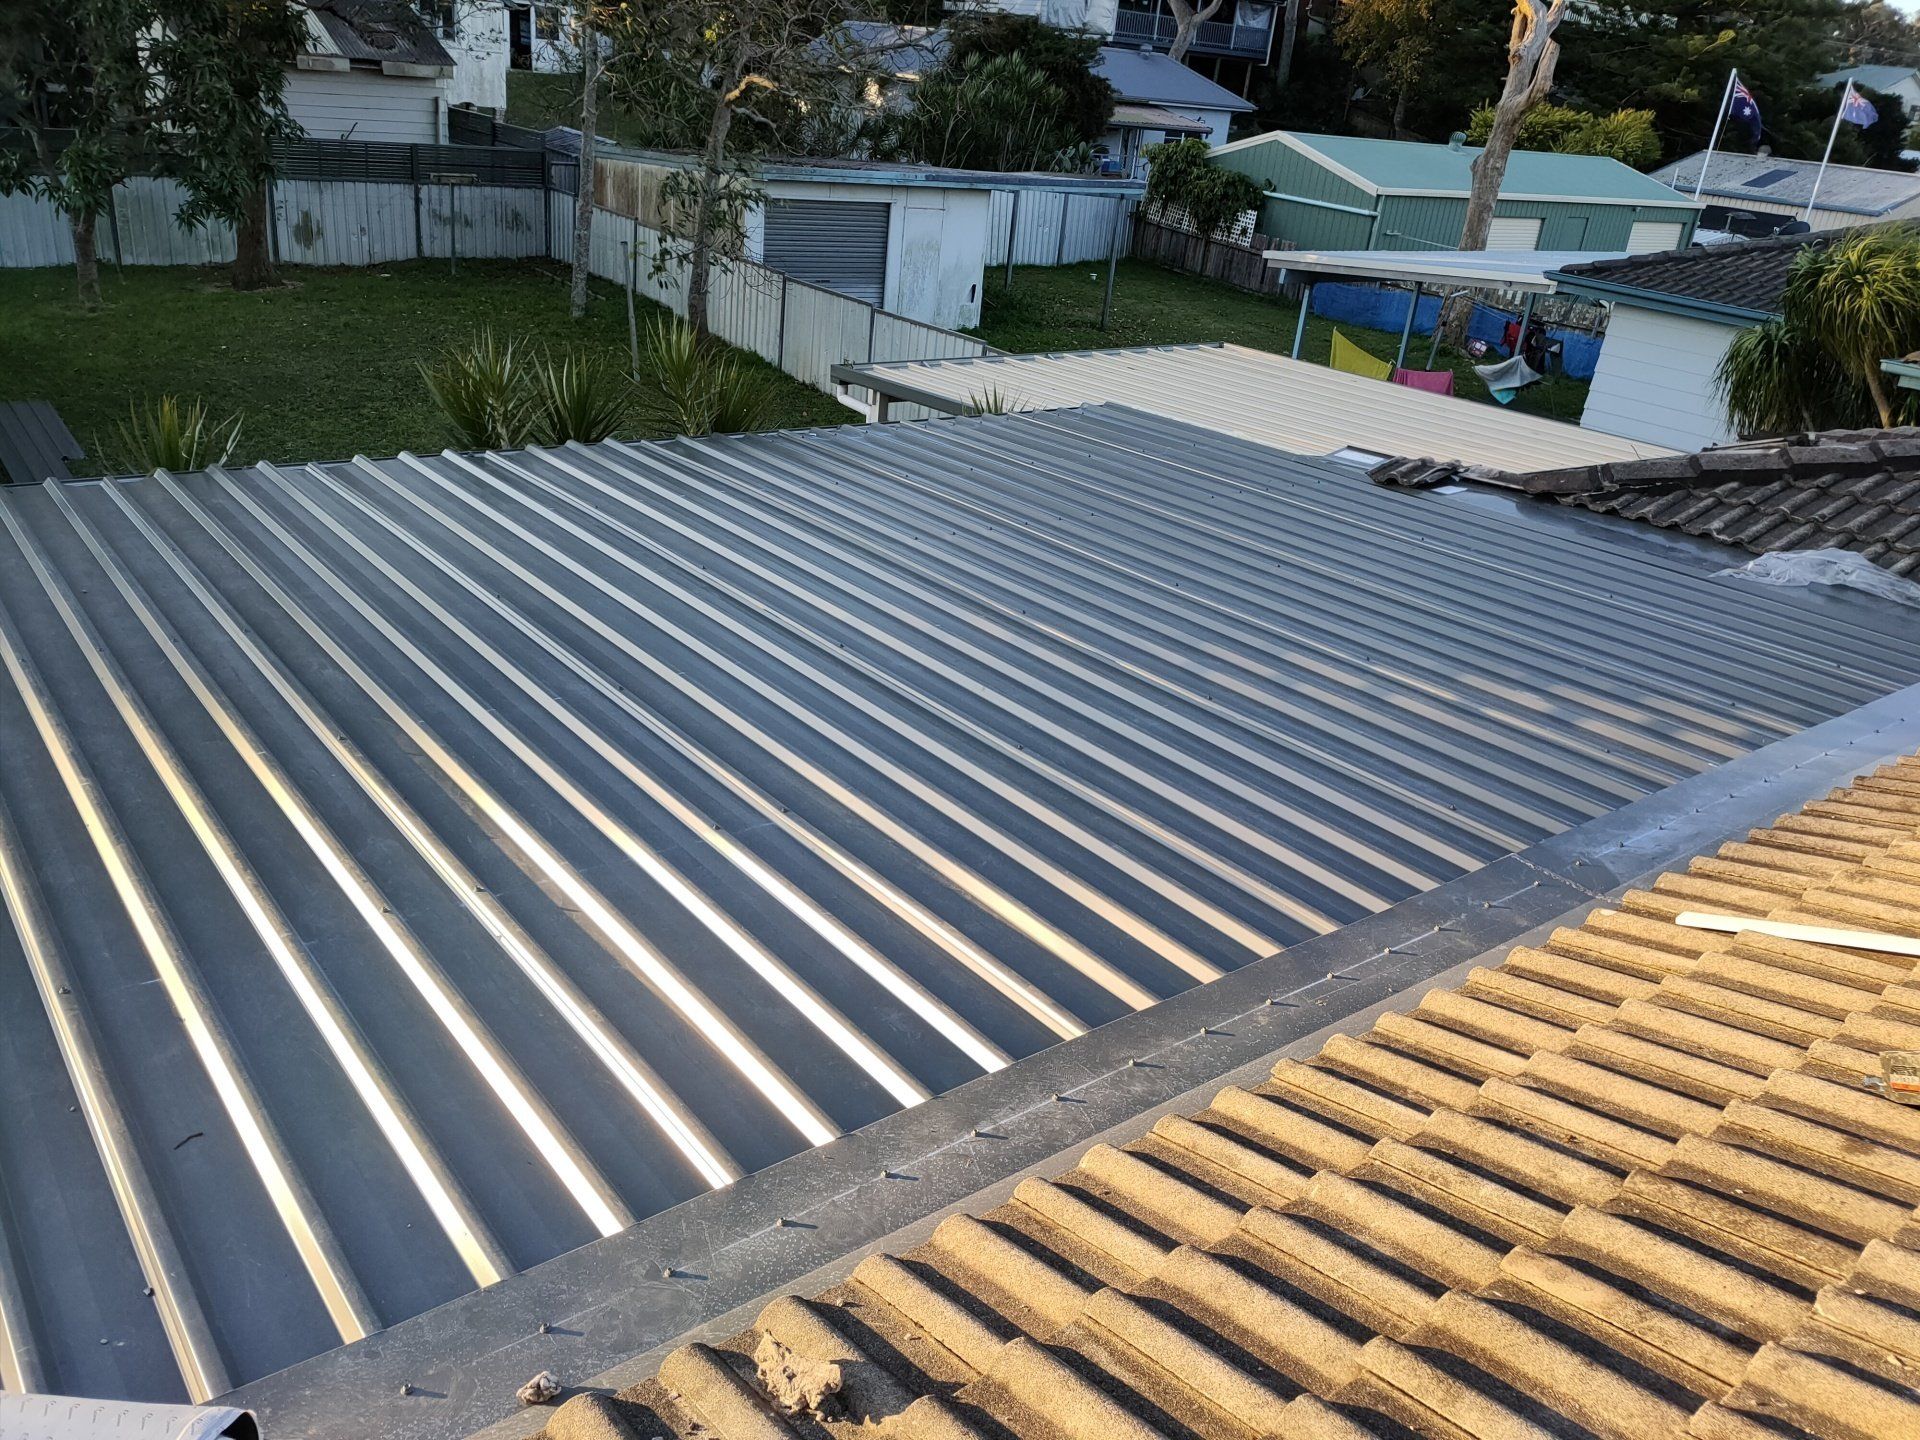 Red Metal Roof - Roofing Specialist in Port Stephens, NSW